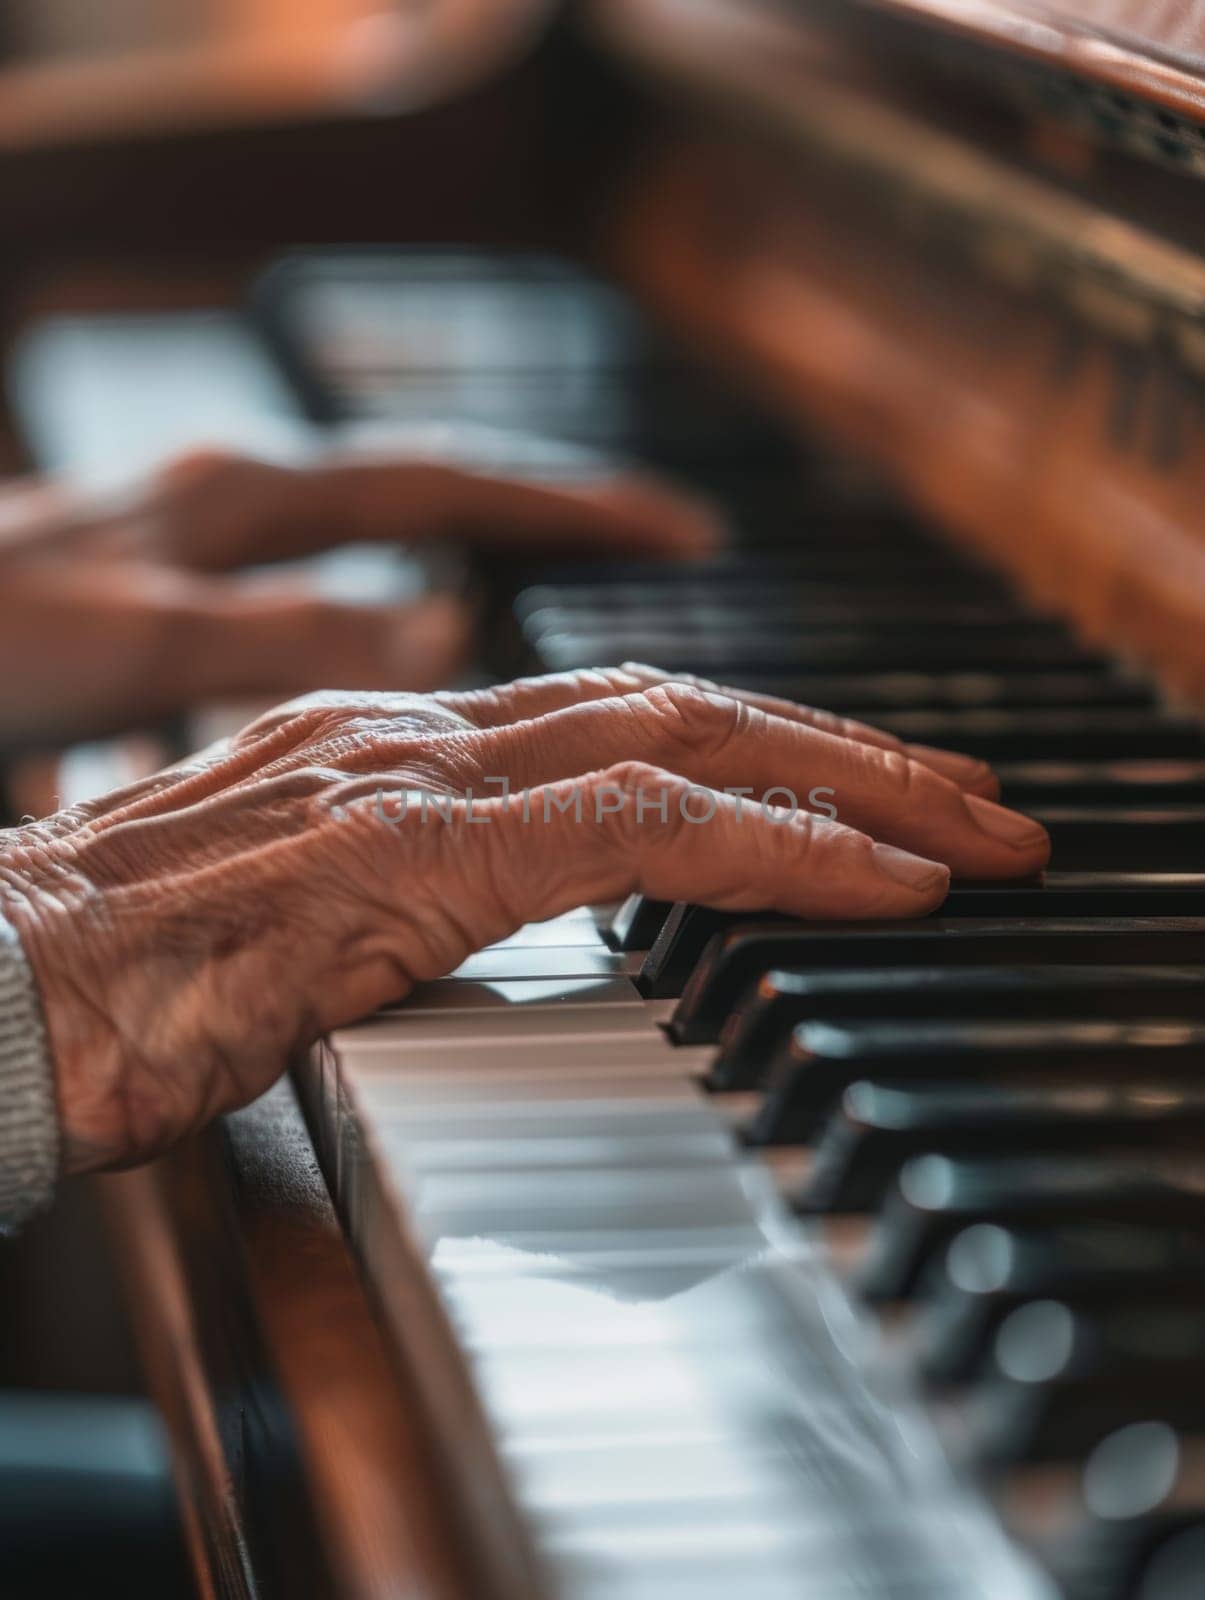 A close-up of an experienced hand gracefully playing the piano, with soft lighting enhancing the warm ambience of the music-filled room. The bokeh effect in the background adds to intimate concert